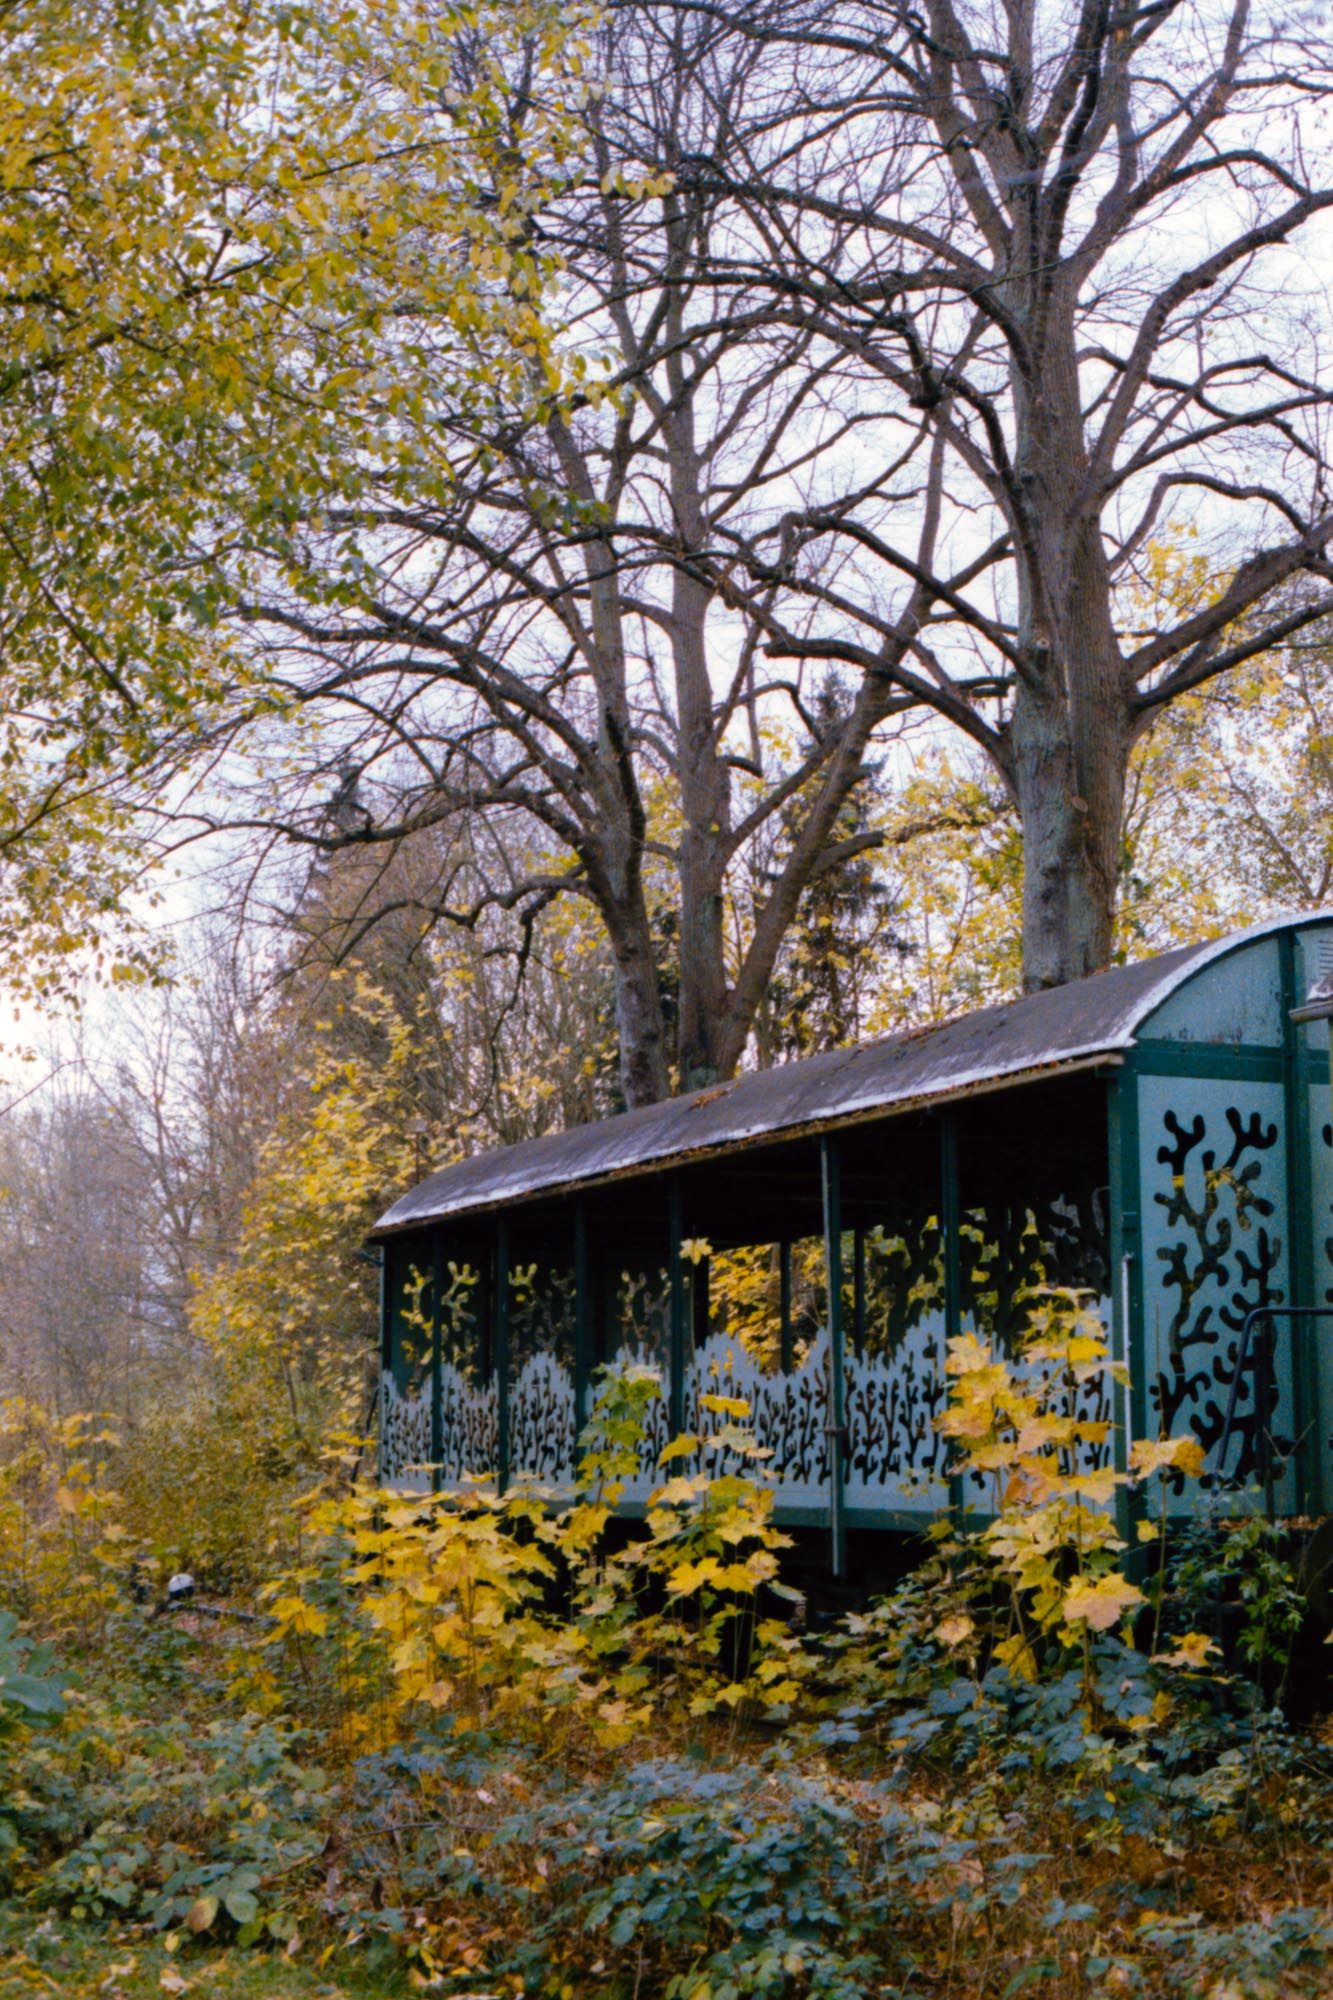 Lost railway-car surrounded by colorful autumn trees.